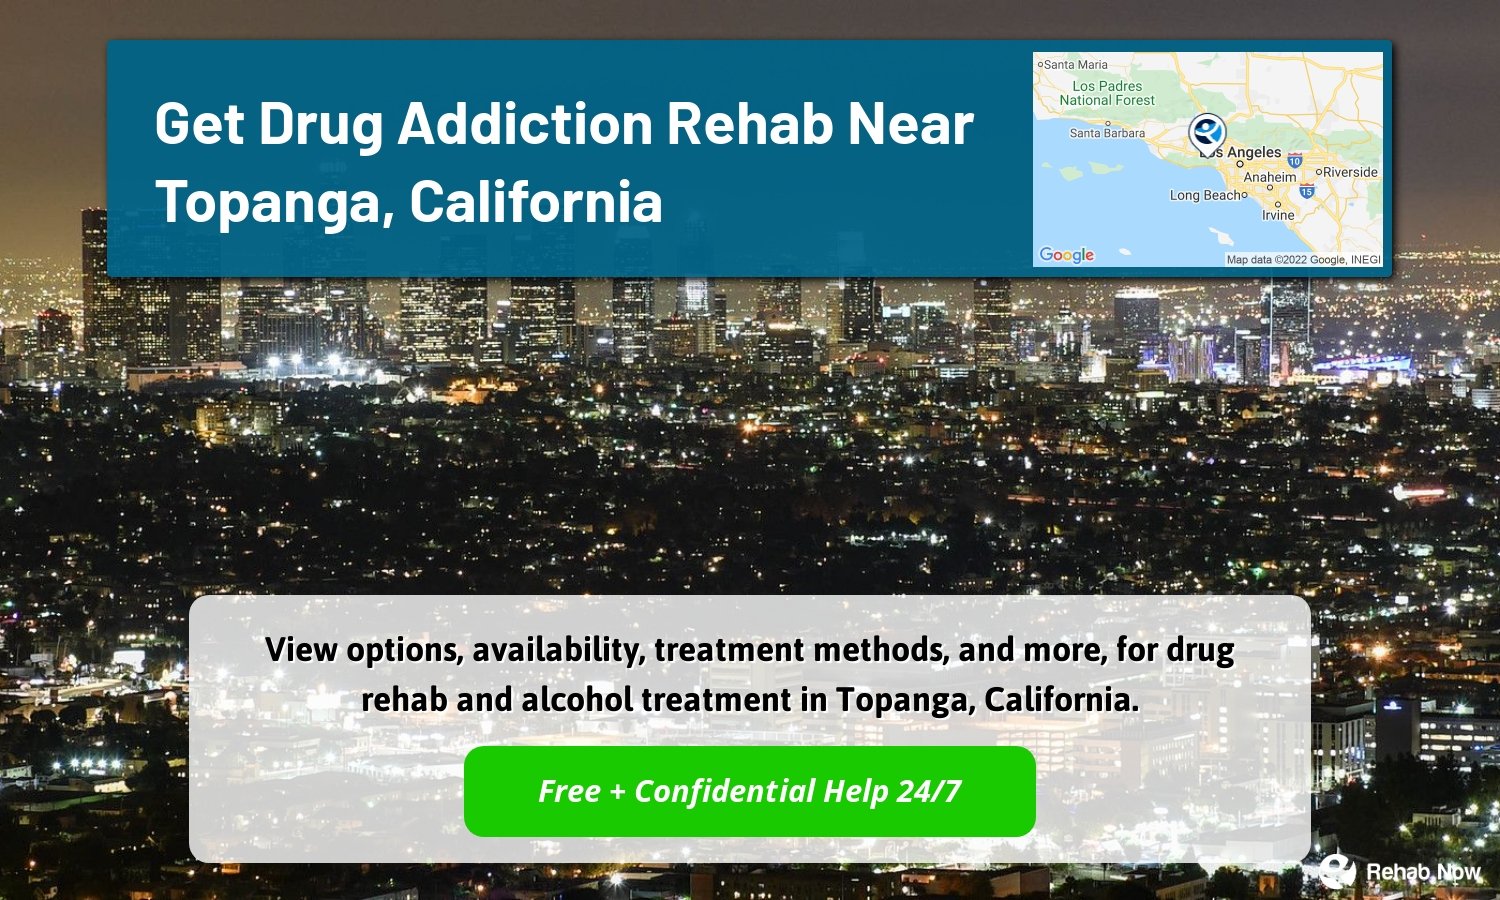 View options, availability, treatment methods, and more, for drug rehab and alcohol treatment in Topanga, California.